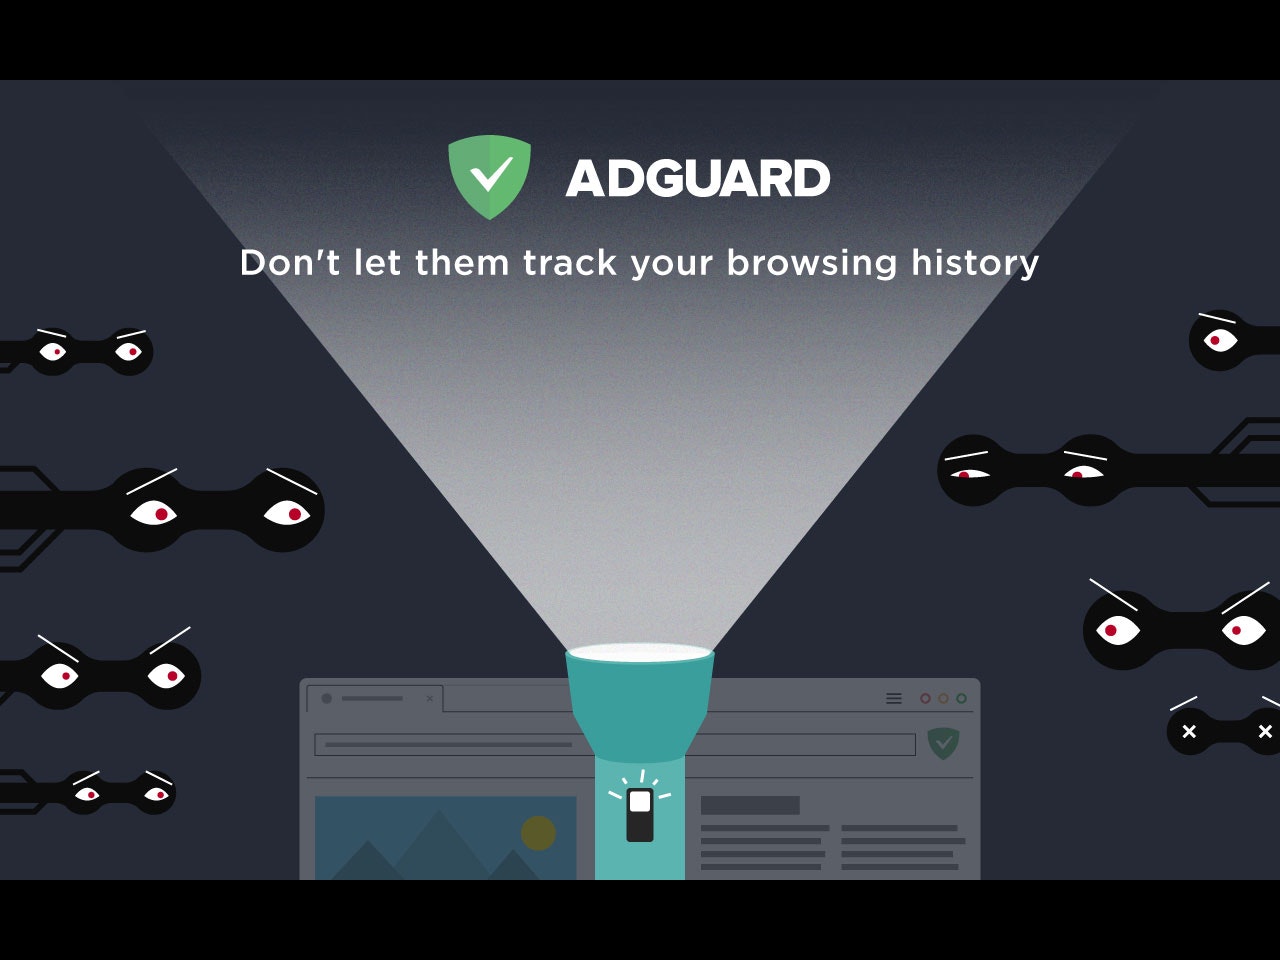 adguard for mac review